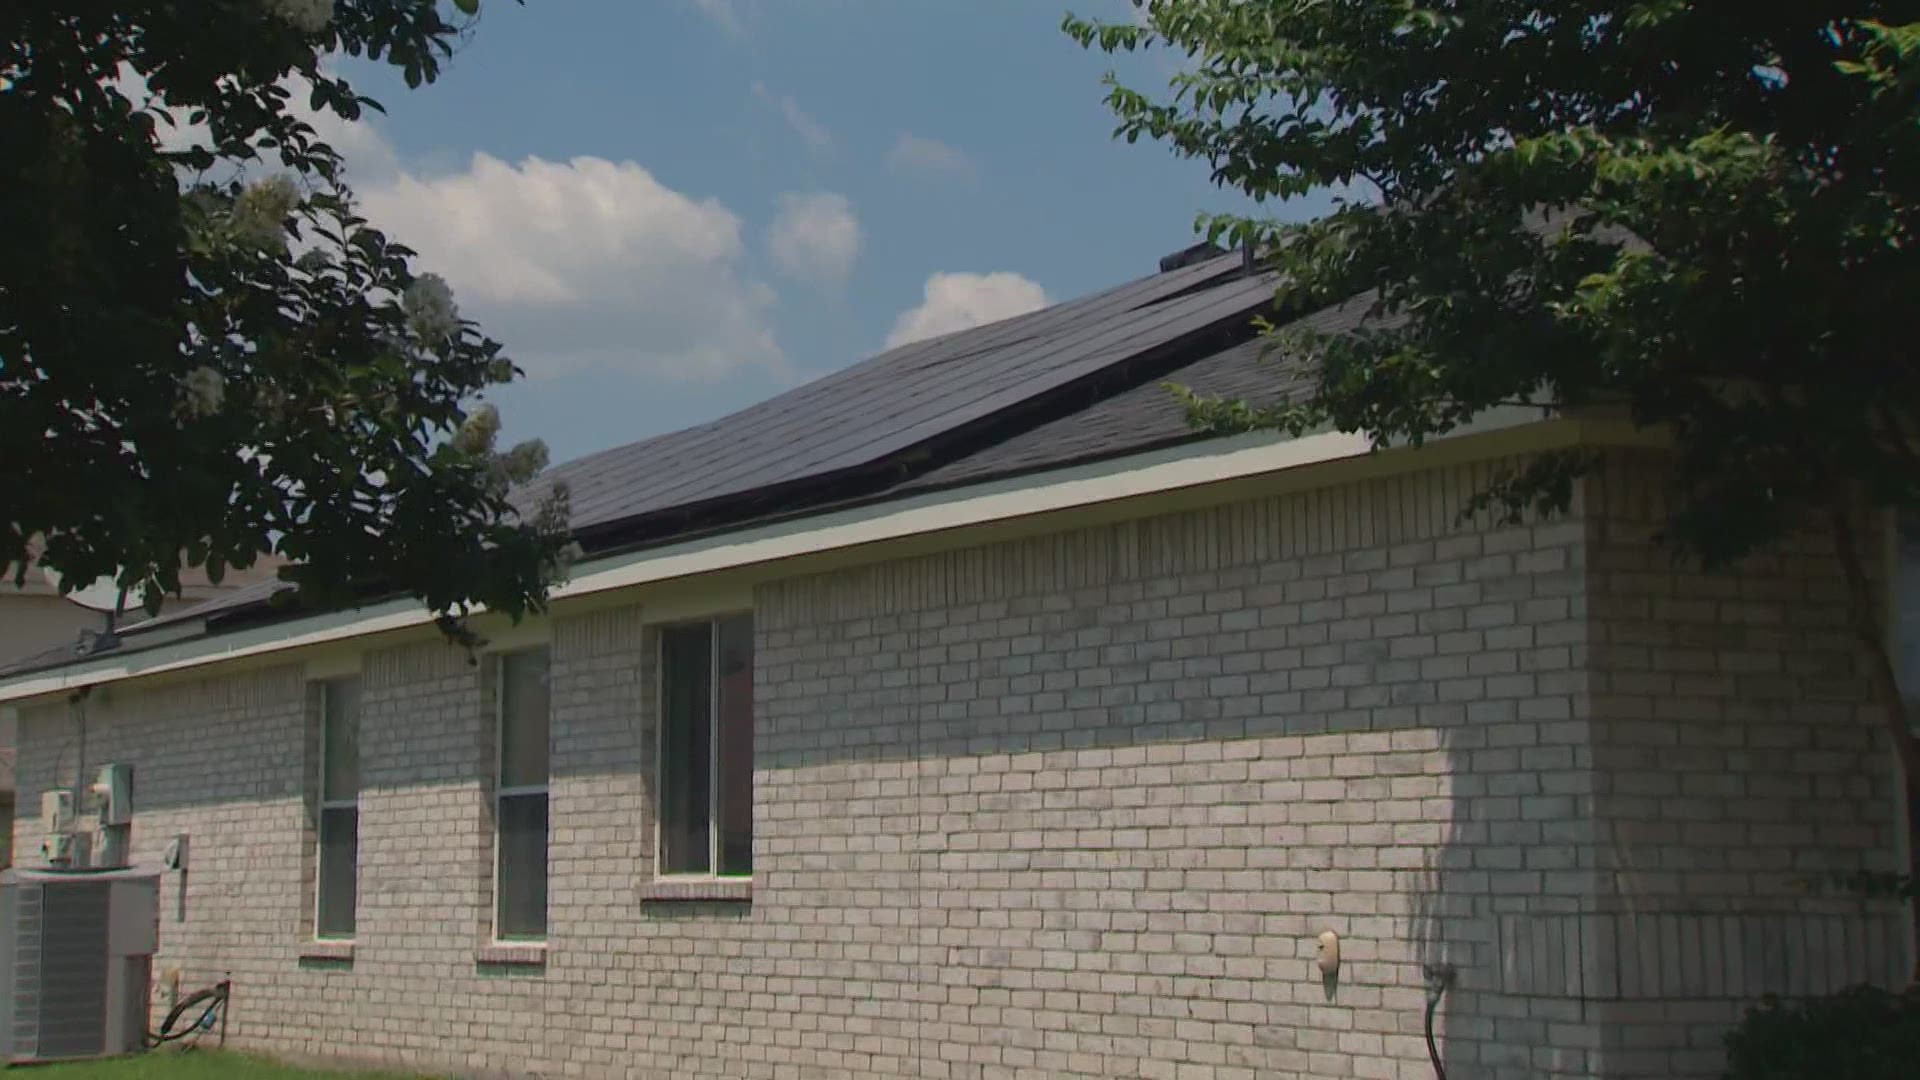 After ERCOT's call to conserve energy this week, homeowners with solar are relieved they don't have to worry about ERCOT.